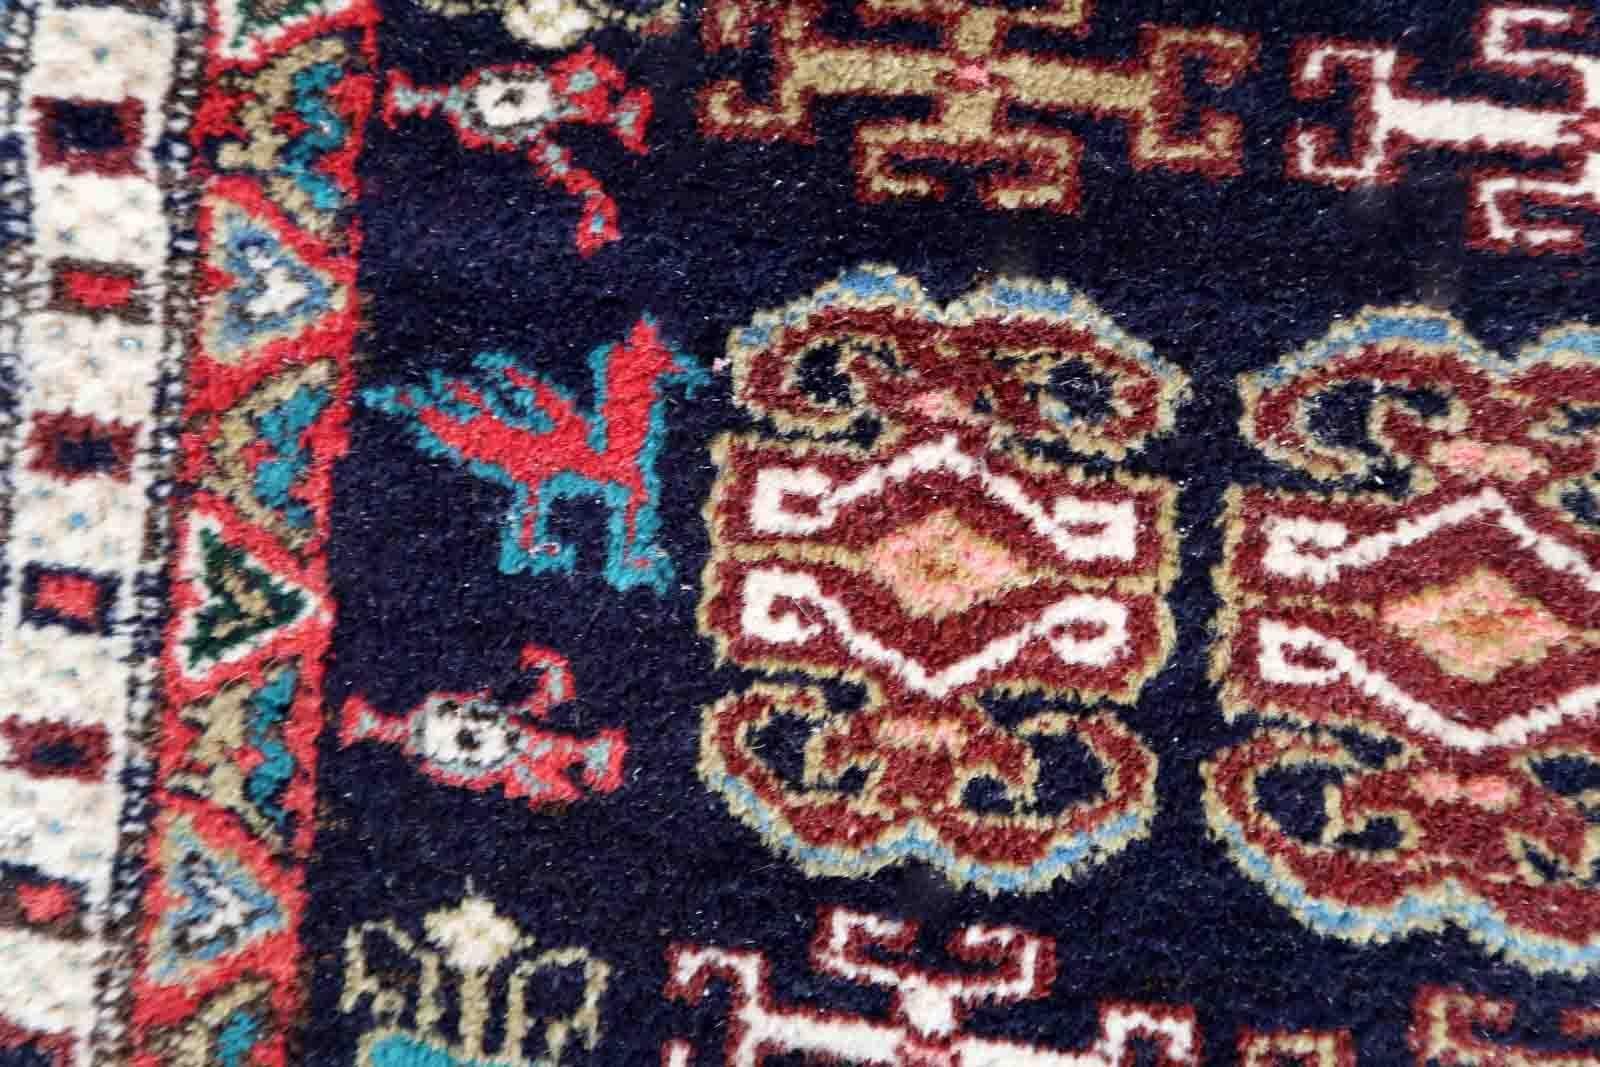 Handmade vintage Erevan rug from Armenia in navy blue color. The rug is from the end of 20th century in original good condition.

-condition: original good,

-circa: 1960s,

-size: 5.5' x 8.8' (169cm x 269cm),

-material: wool,

-country